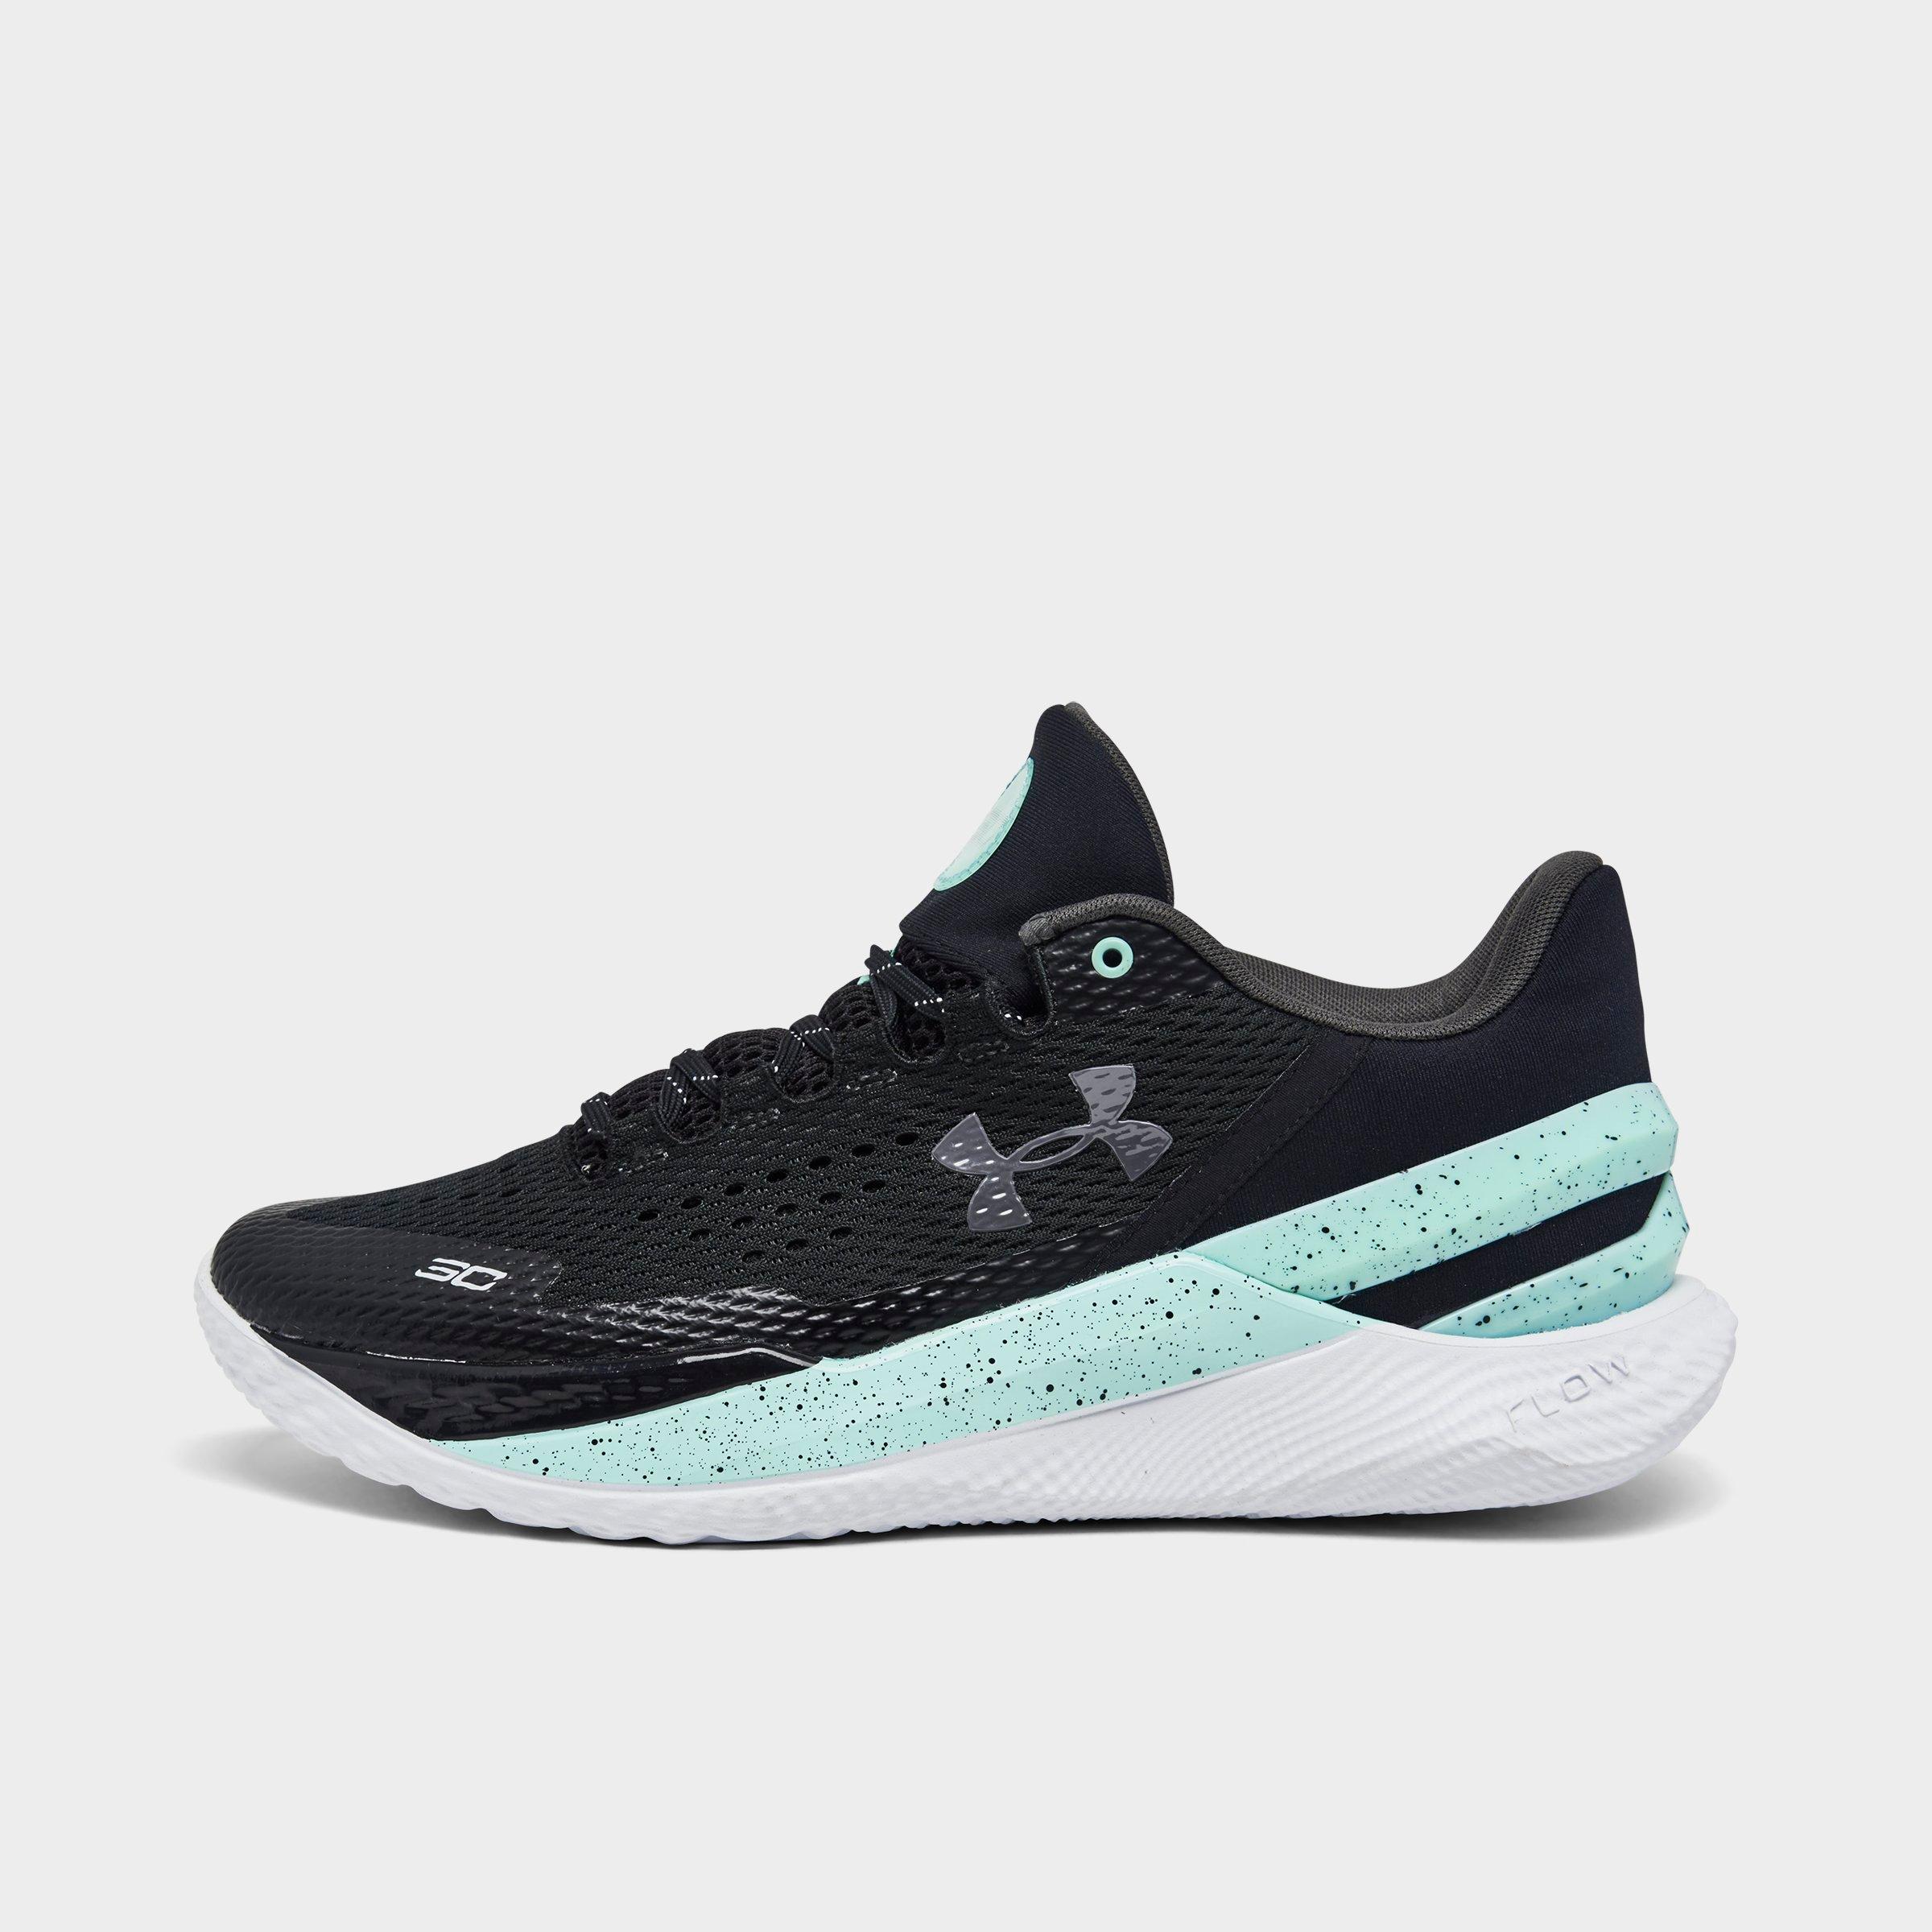 Under Armour Curry 2 Low FloTro Basketball Shoes| Finish Line